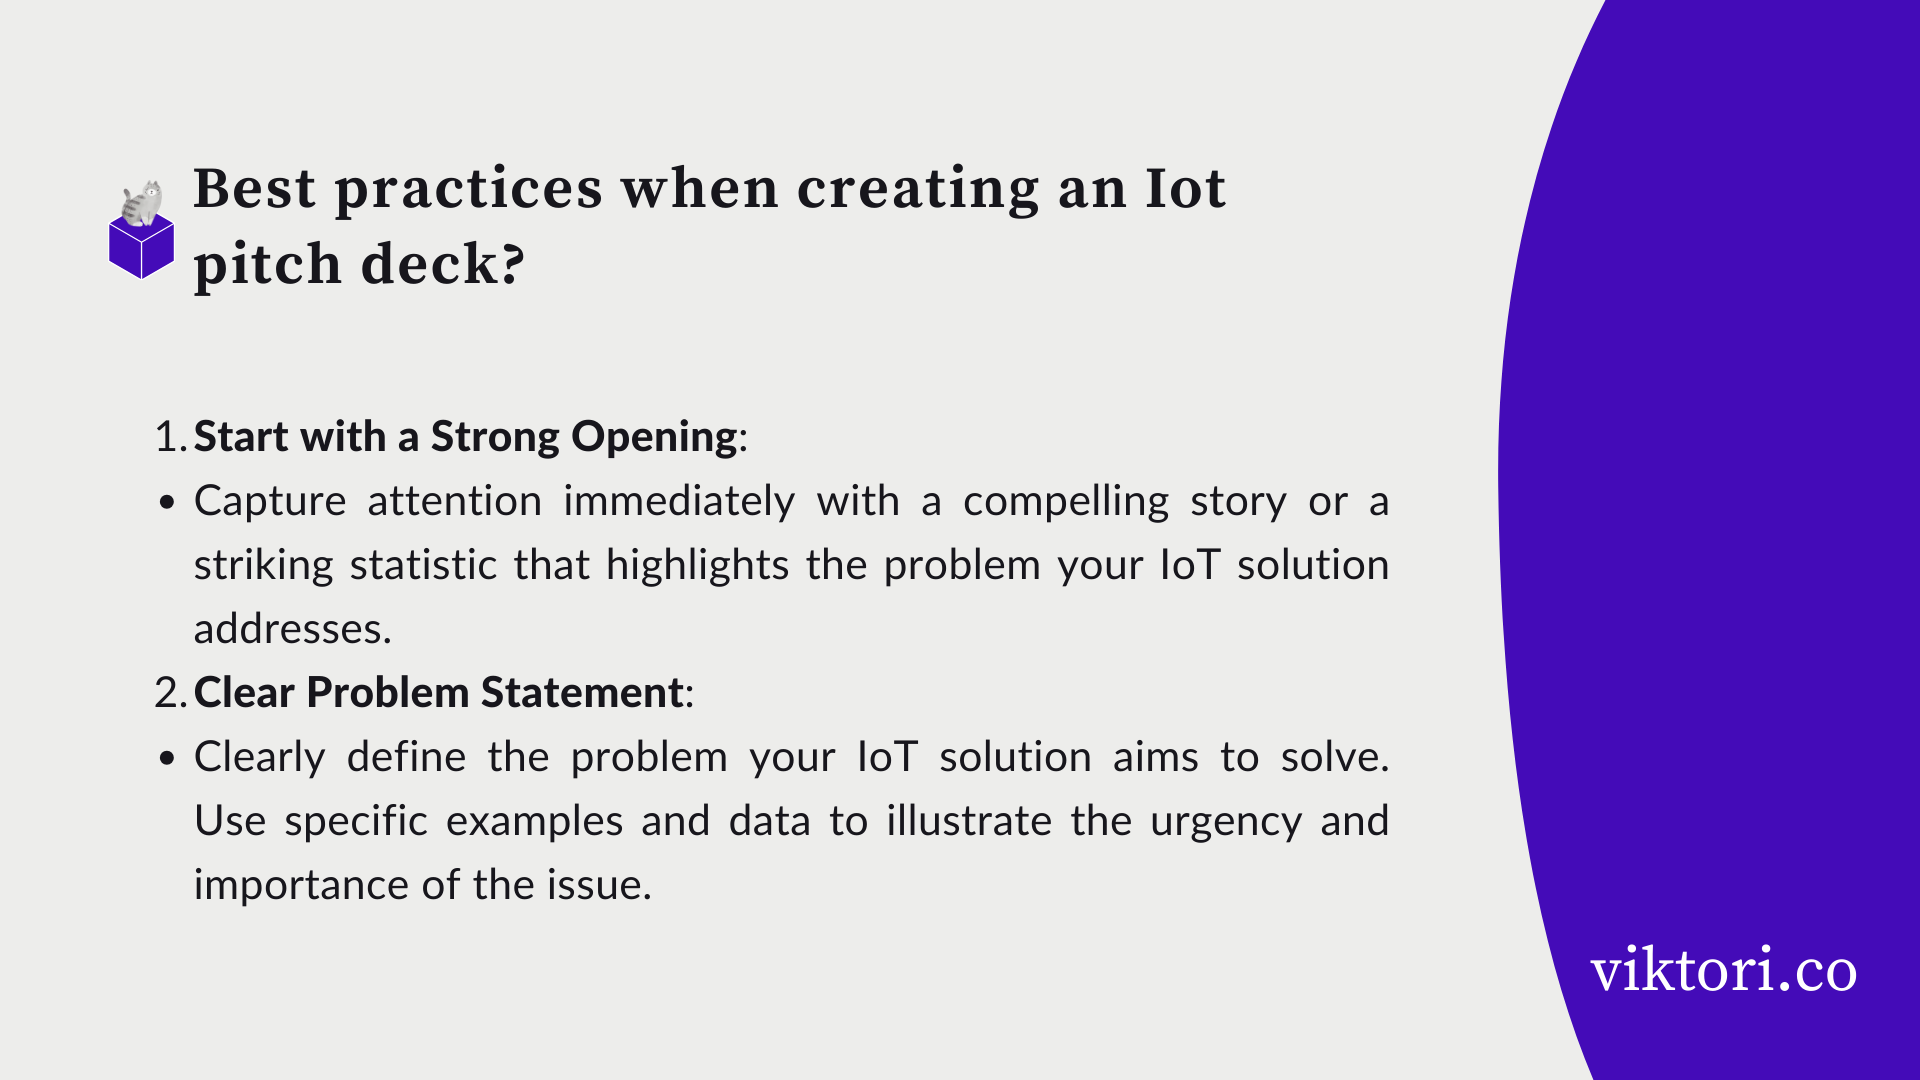 BEST PRActices when creating an IoT pitch deck